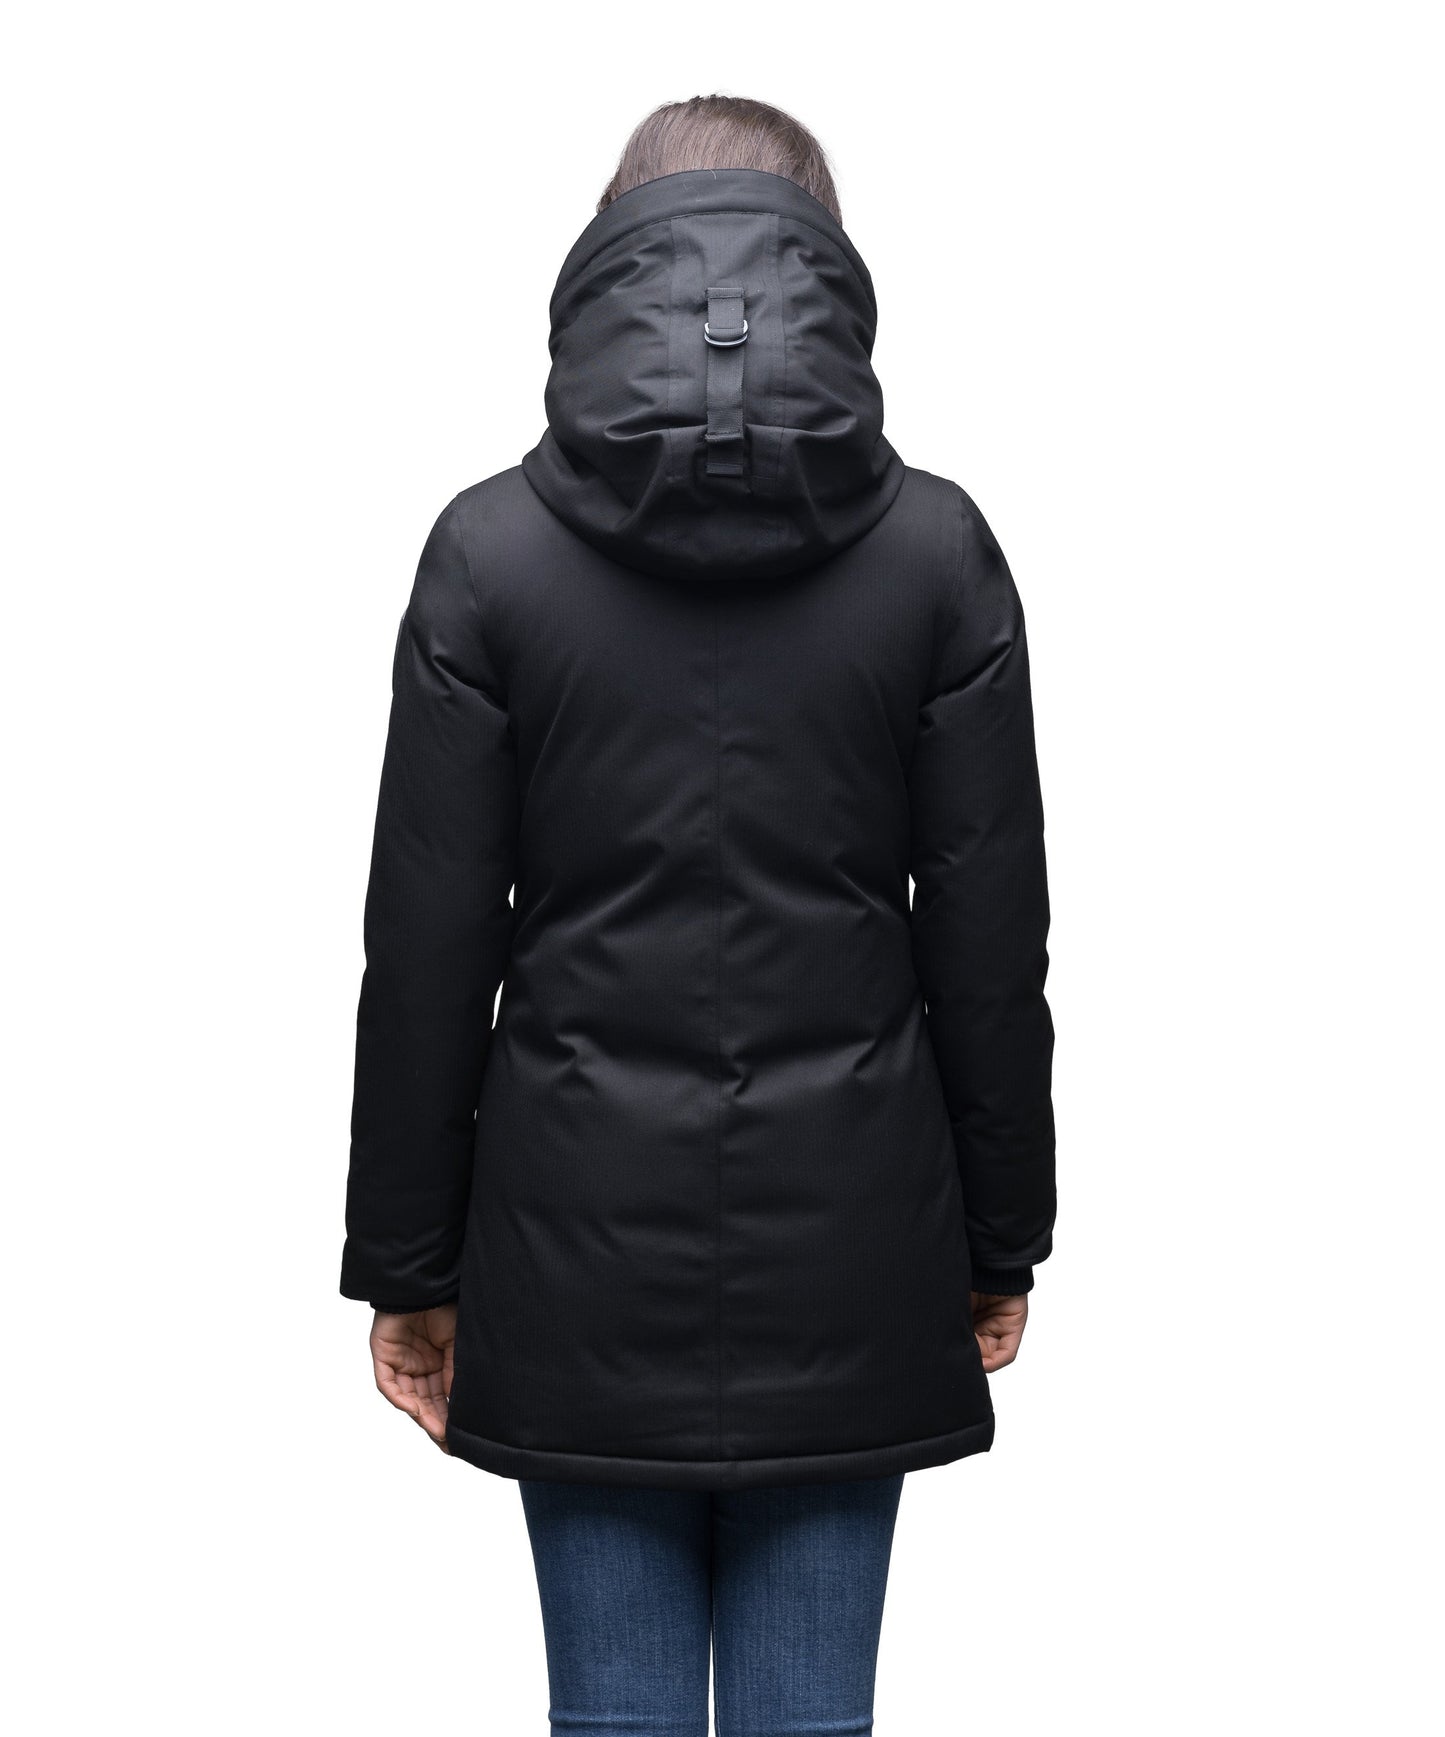 Women's down filled parka that sits just below the hip with a clean look and two hip patch pockets in CH Black